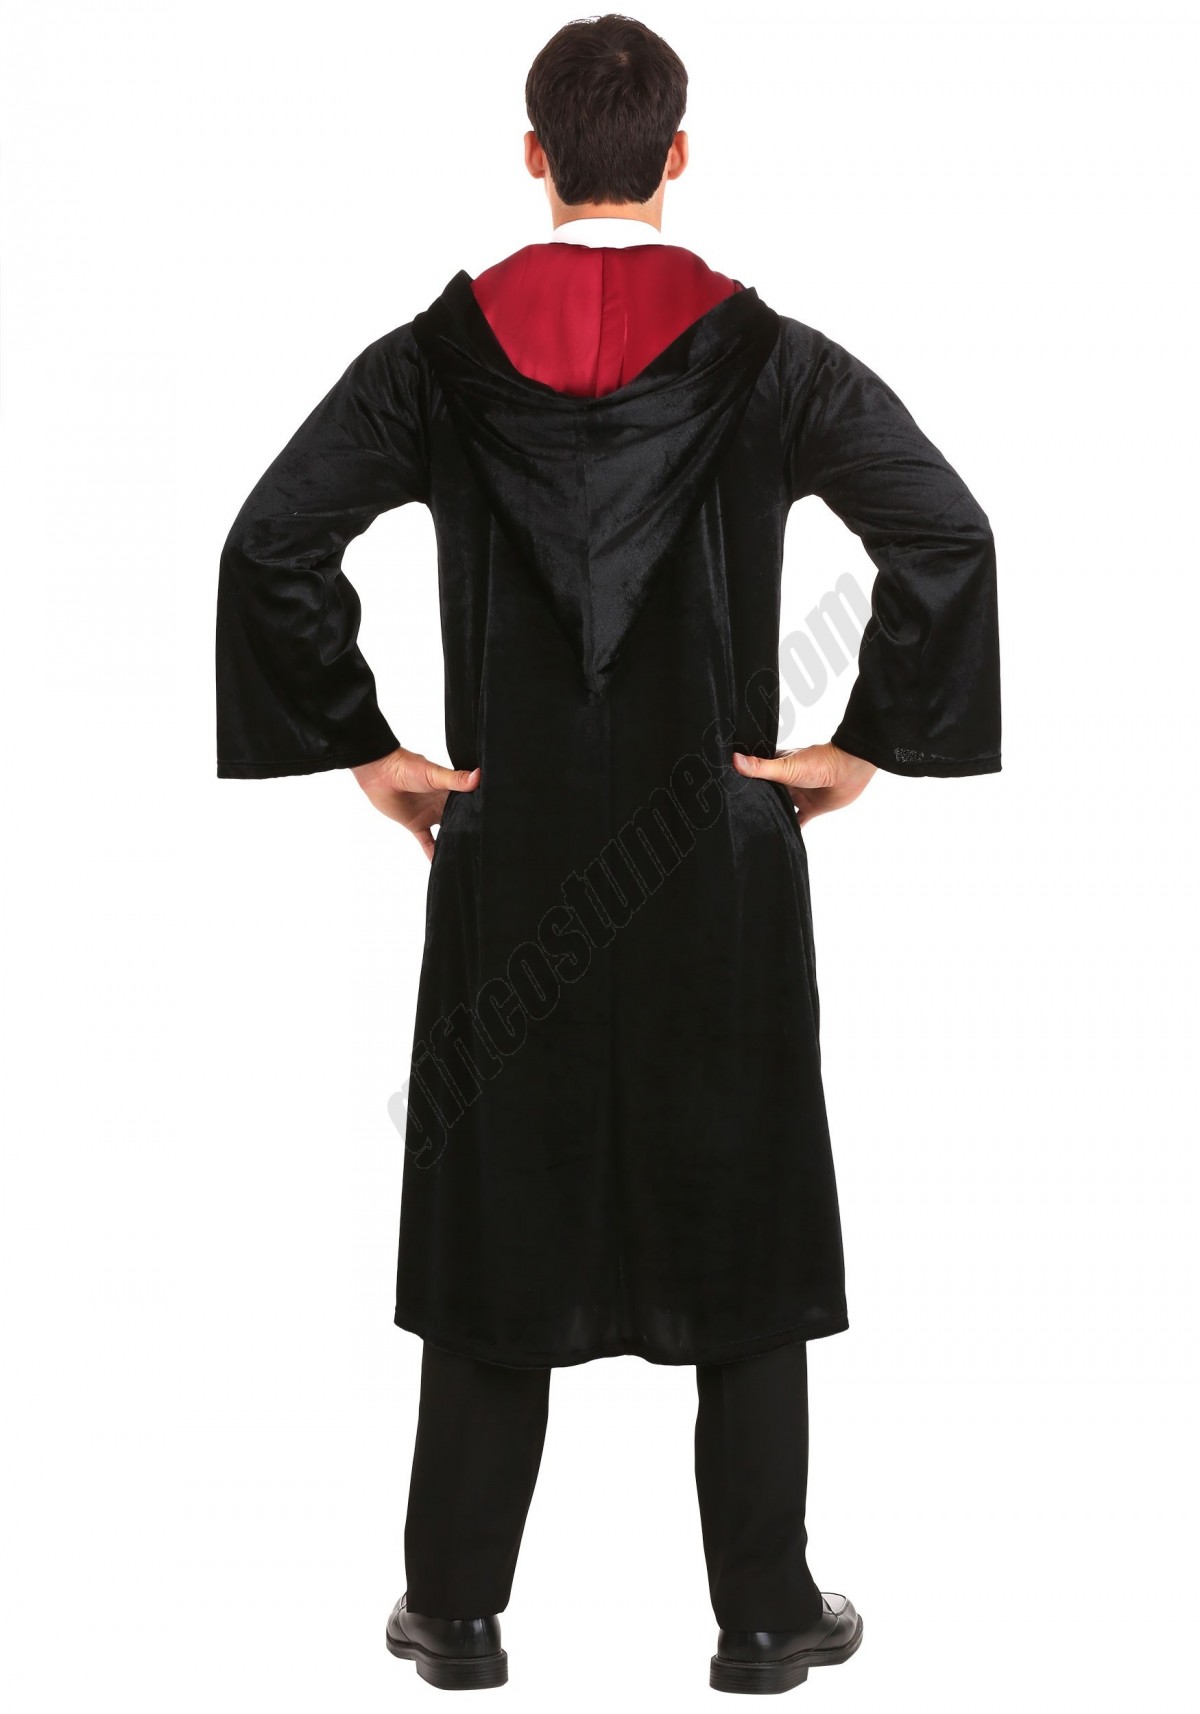 Harry Potter Adult Deluxe Gryffindor Robe Costume Promotions - -3